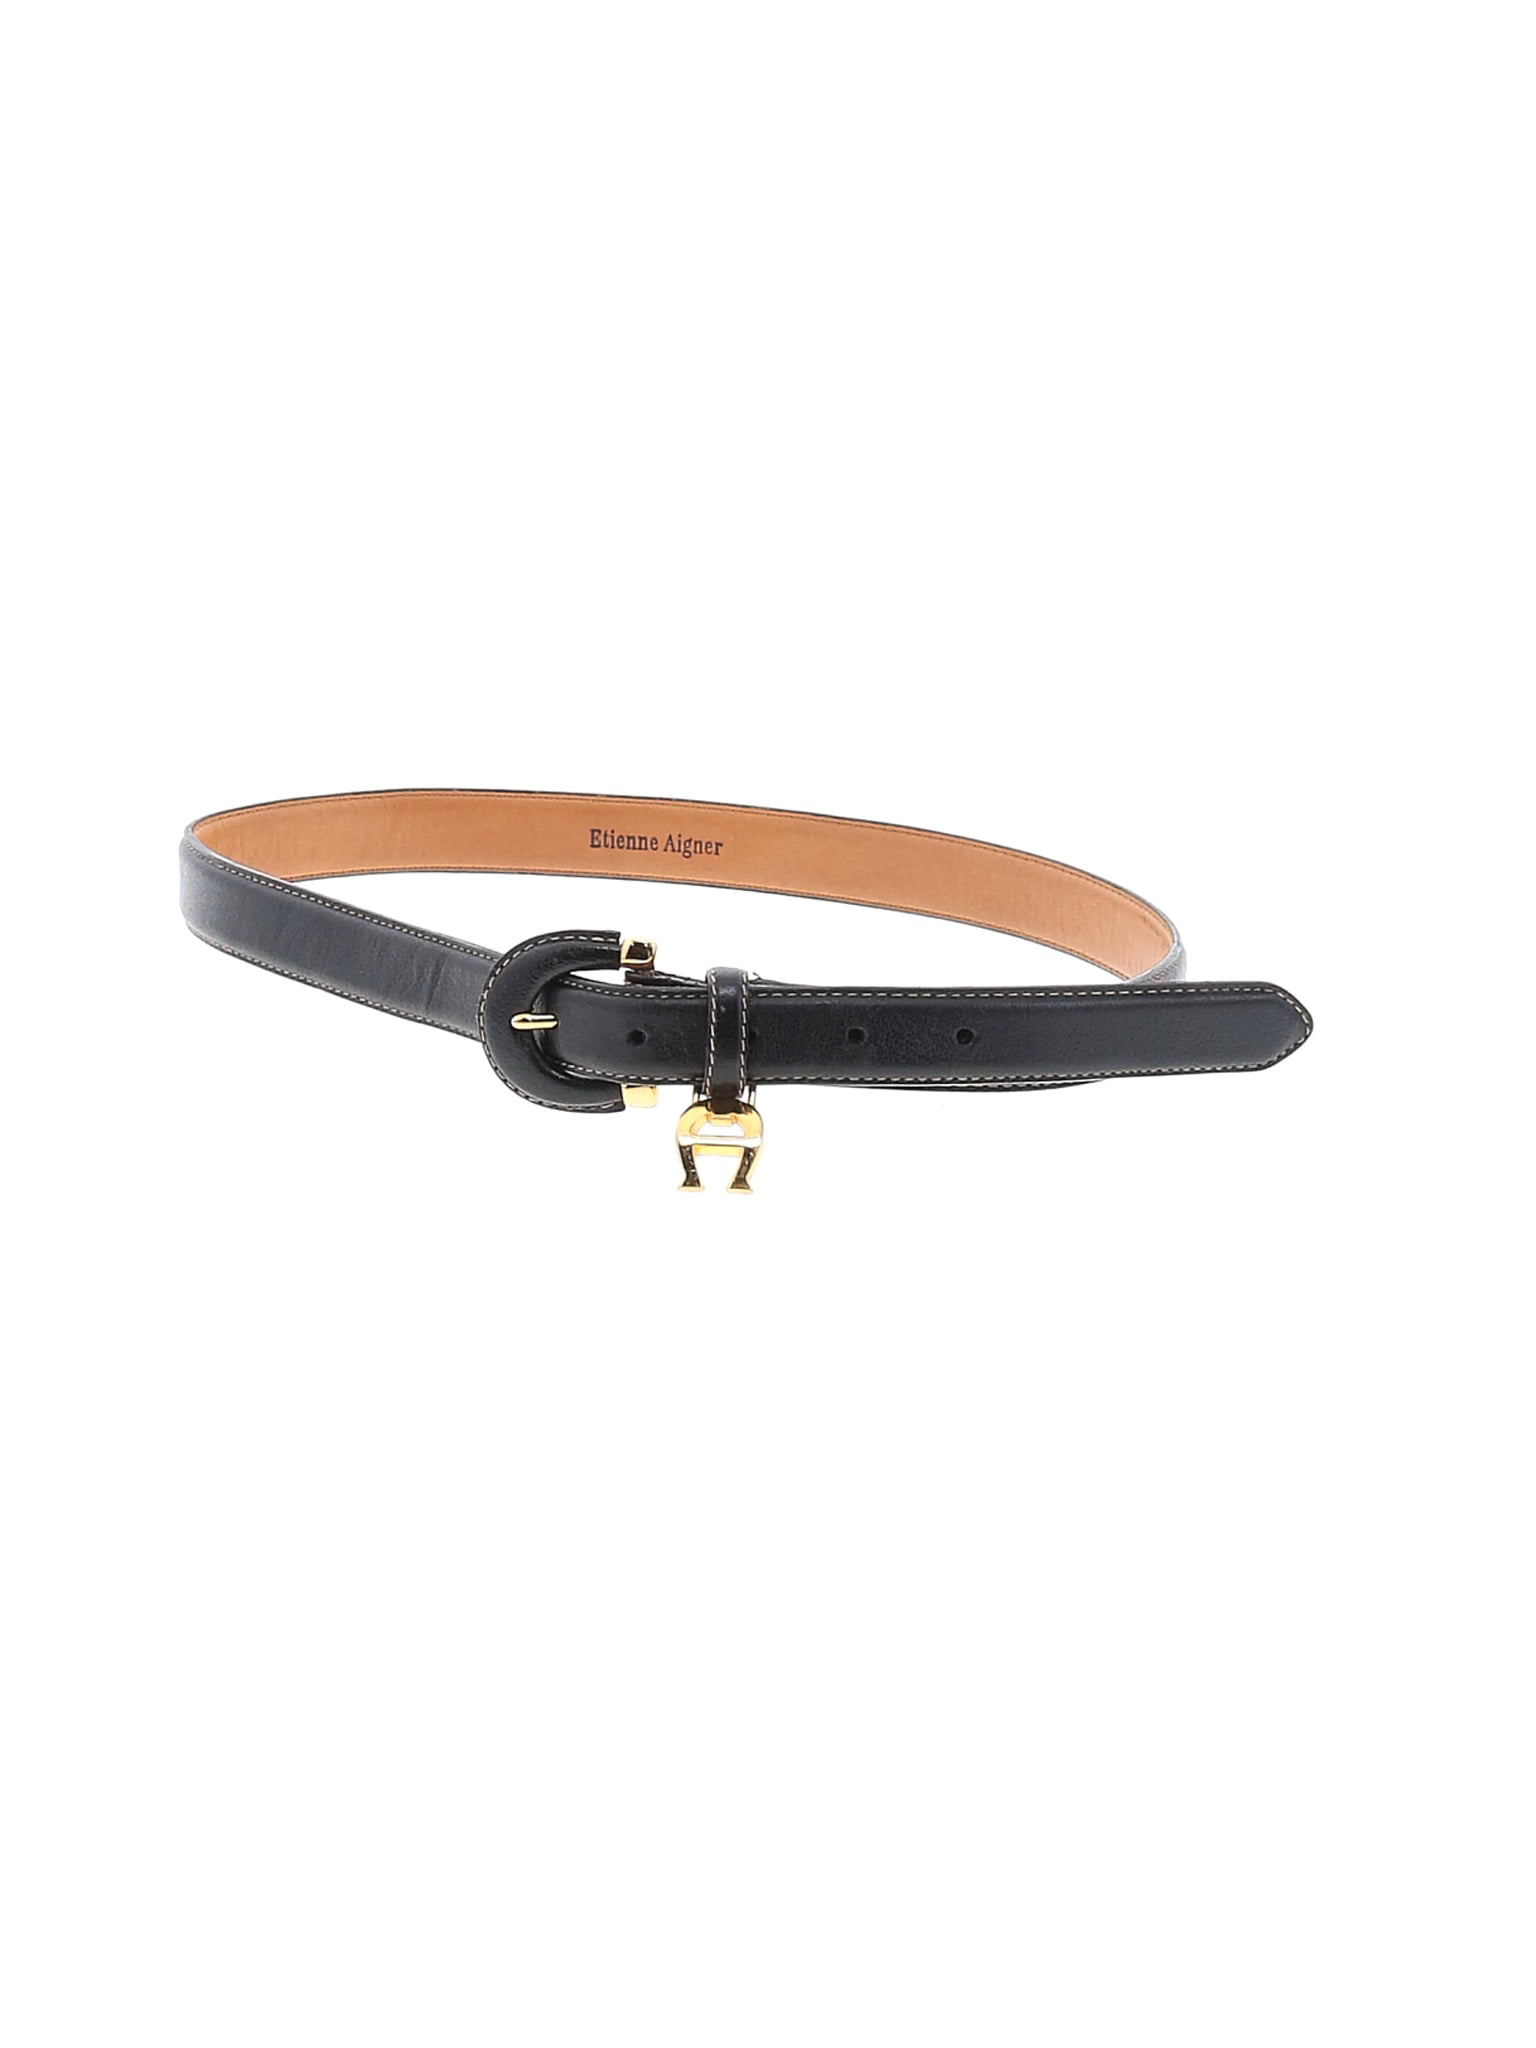 ideologi Reservere albue Pre-Owned Etienne Aigner Girl's Size M Youth Belt - Walmart.com